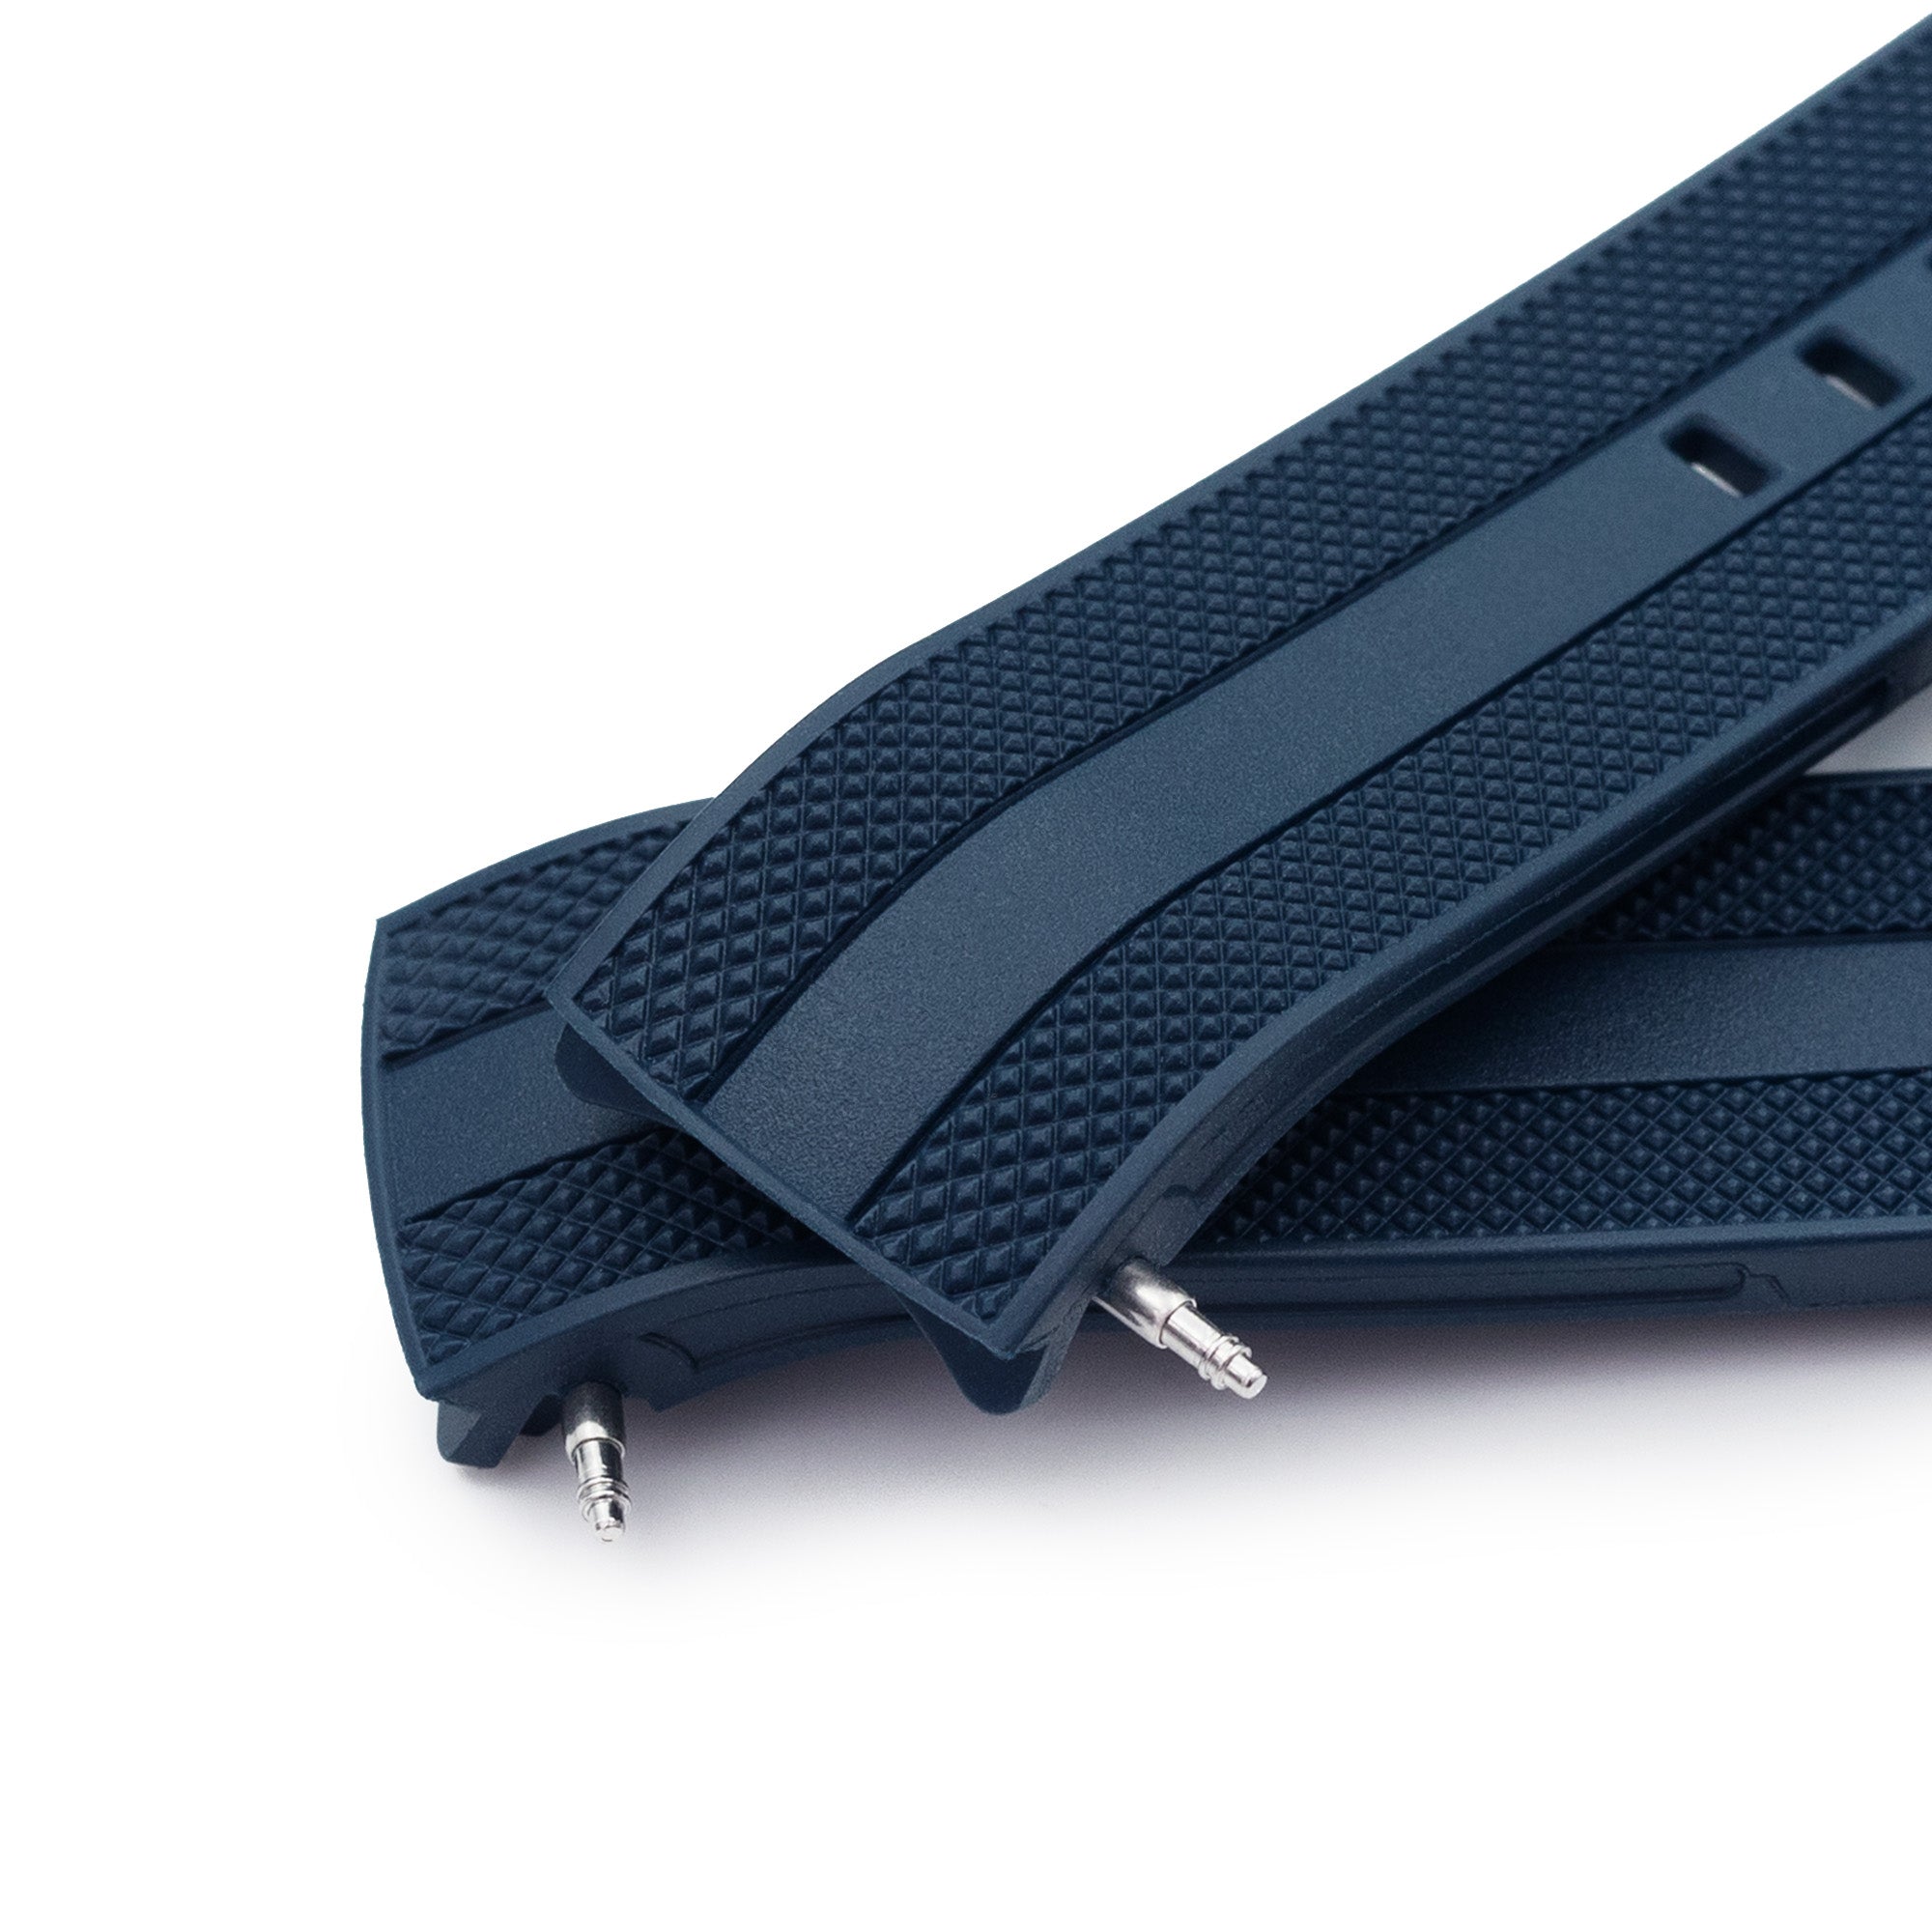 StrapXPro - SPX1C Rubber Strap For Seiko 62MAS (63Mas) SPB/SBDC Series, Navy Blue Strapcode Watch Bands